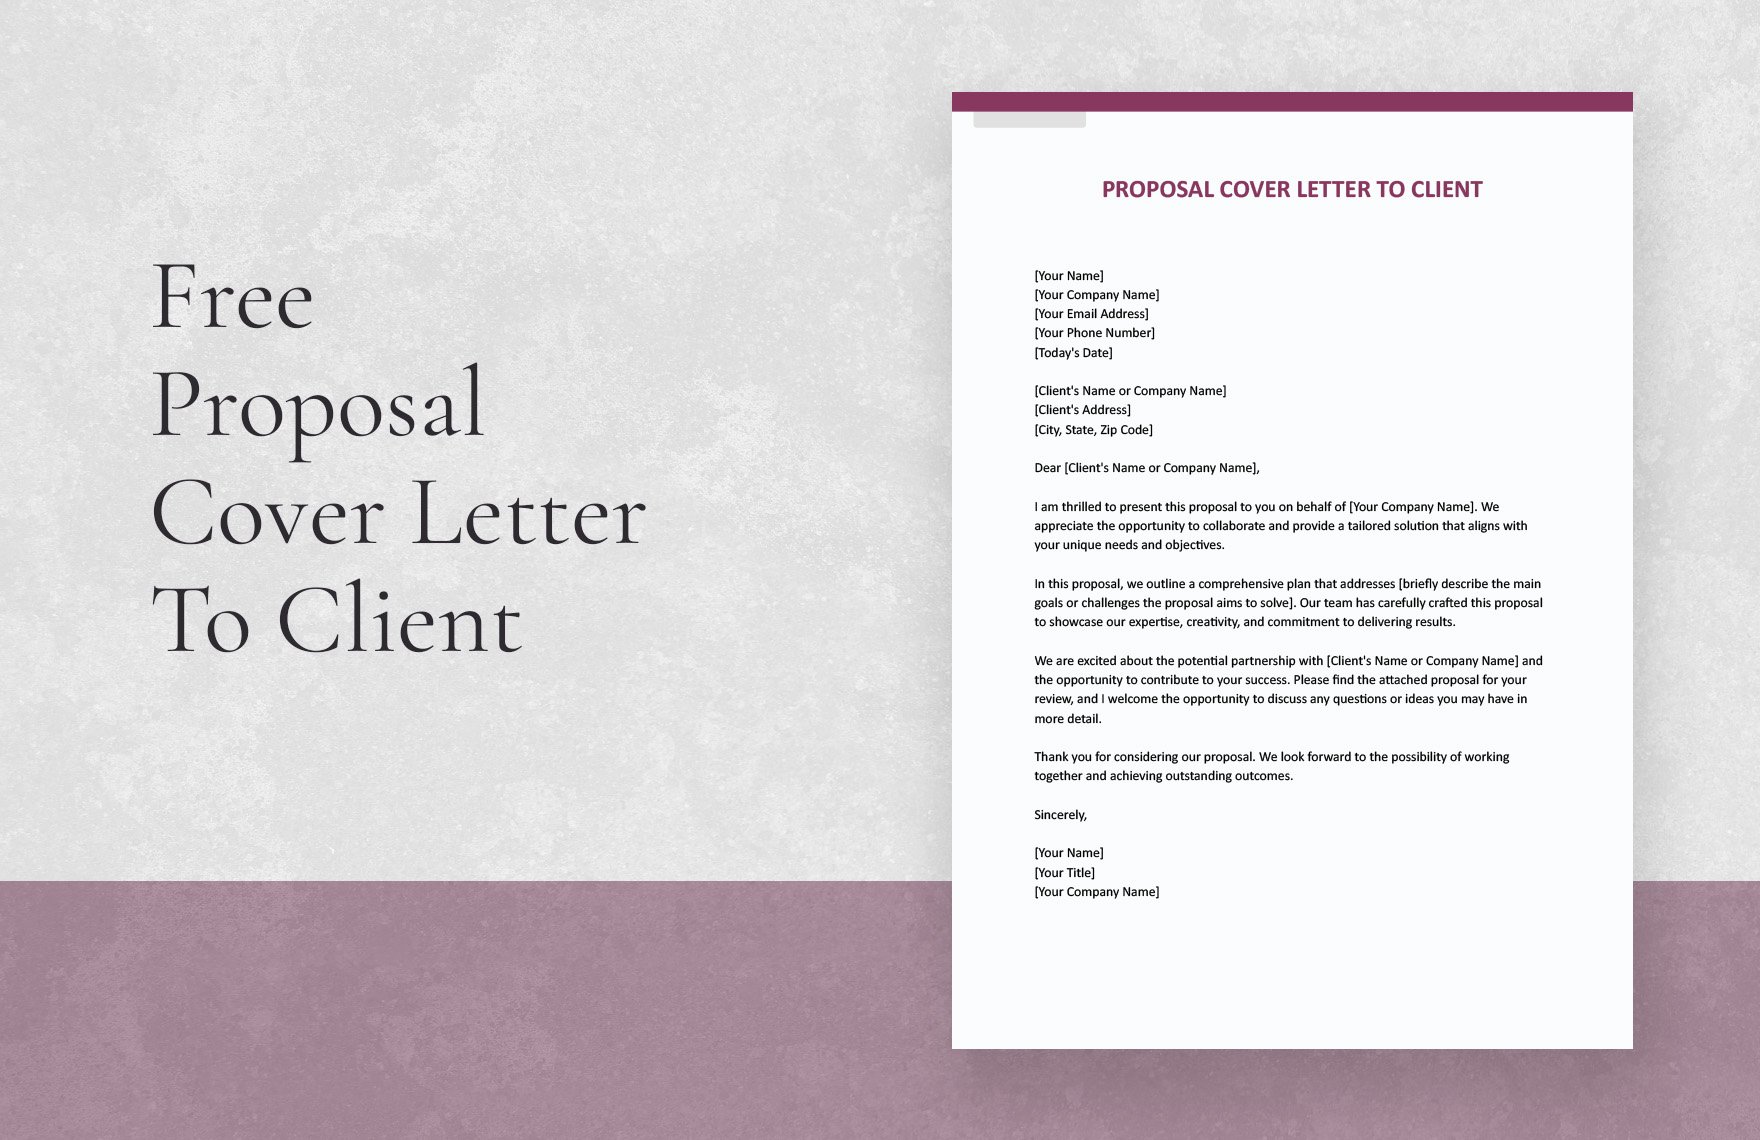 Proposal Cover Letter To Client